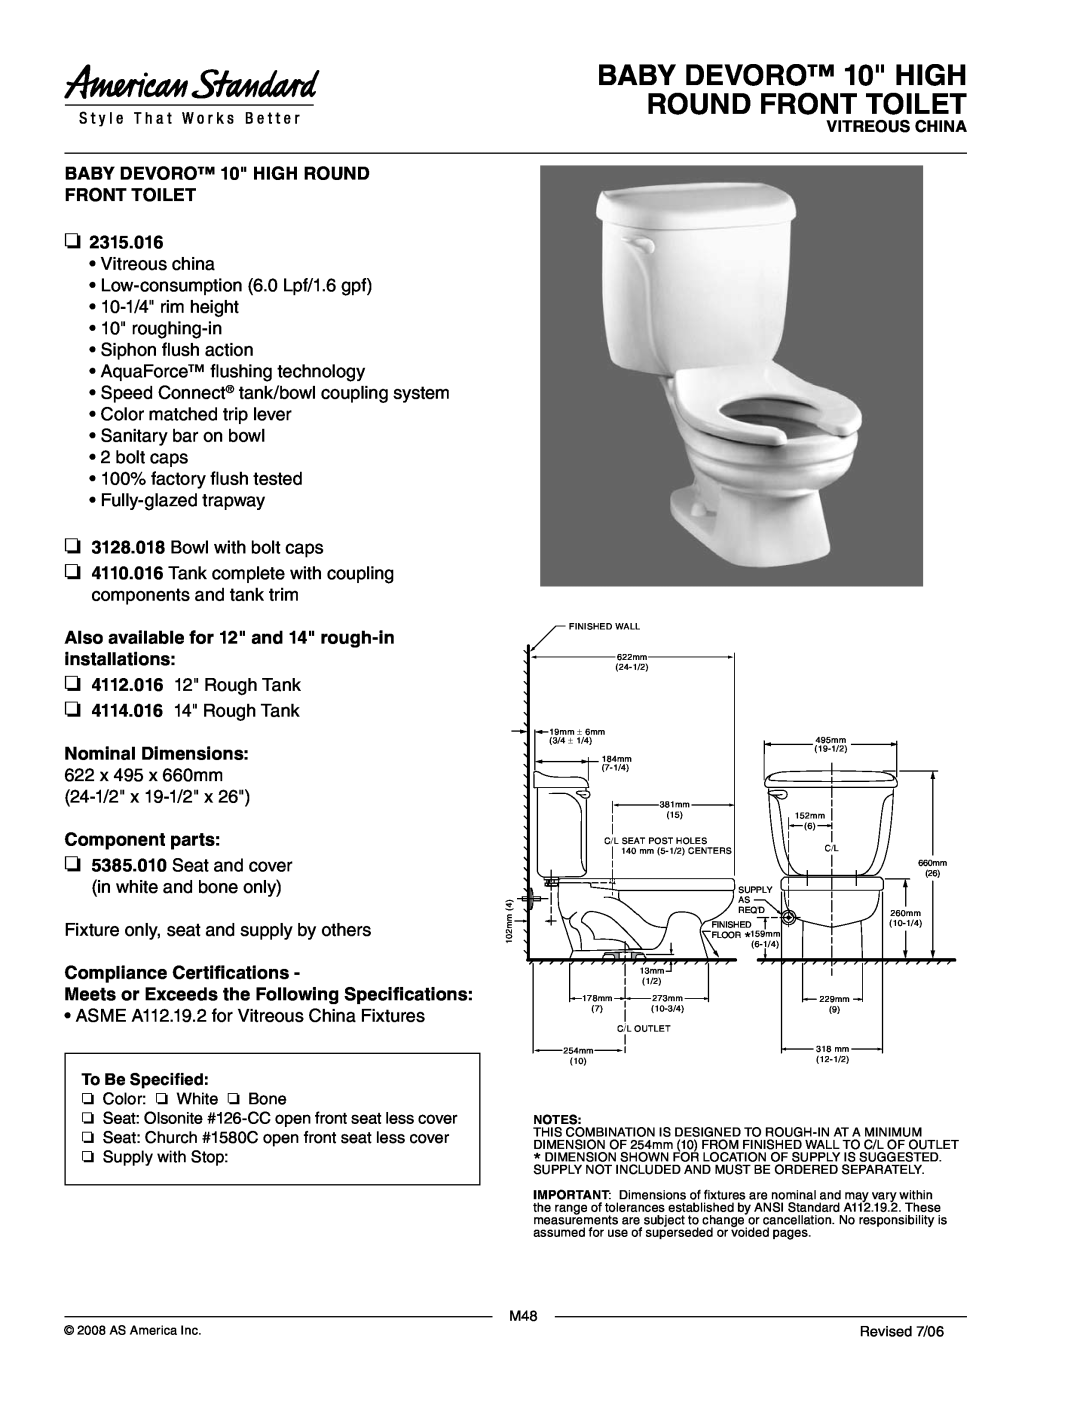 American Standard 3128.018 dimensions BABY DEVORO 10 HIGH ROUND FRONT TOILET, Nominal Dimensions 622 x 495 x 660mm 